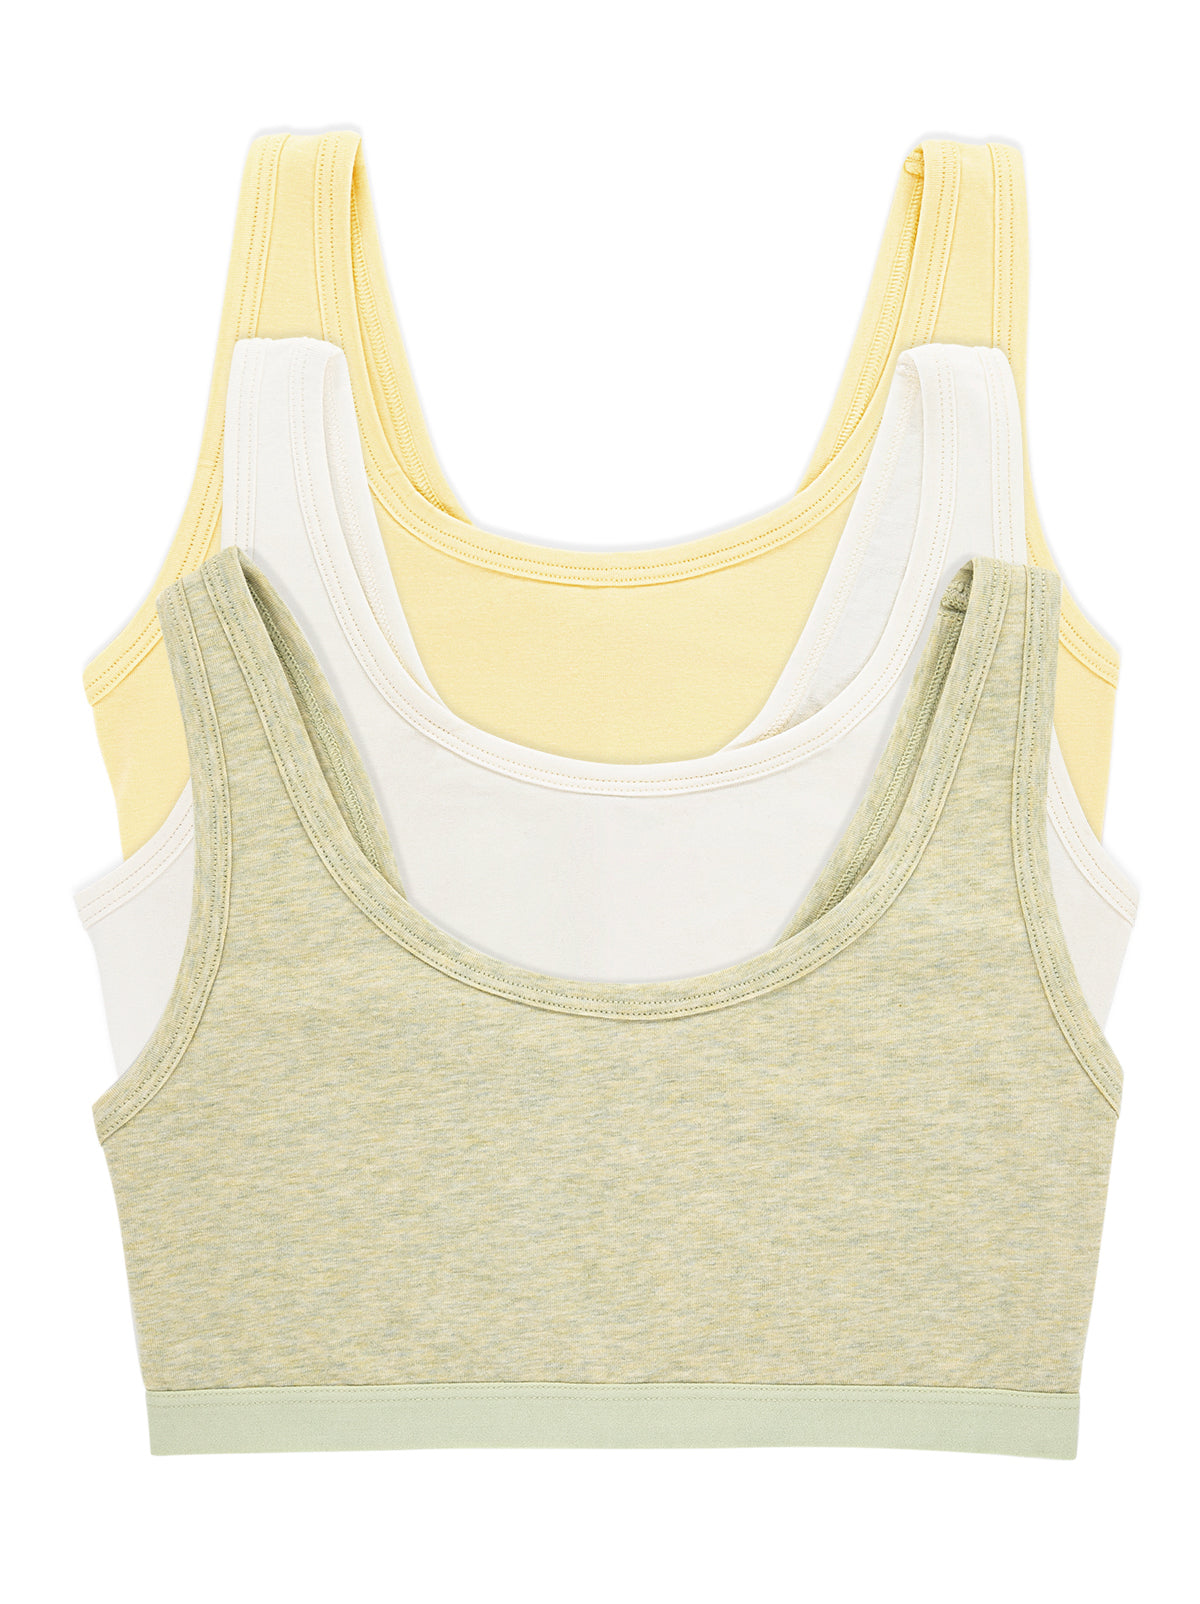 Image of Organic Cotton Bralette 3-Pack